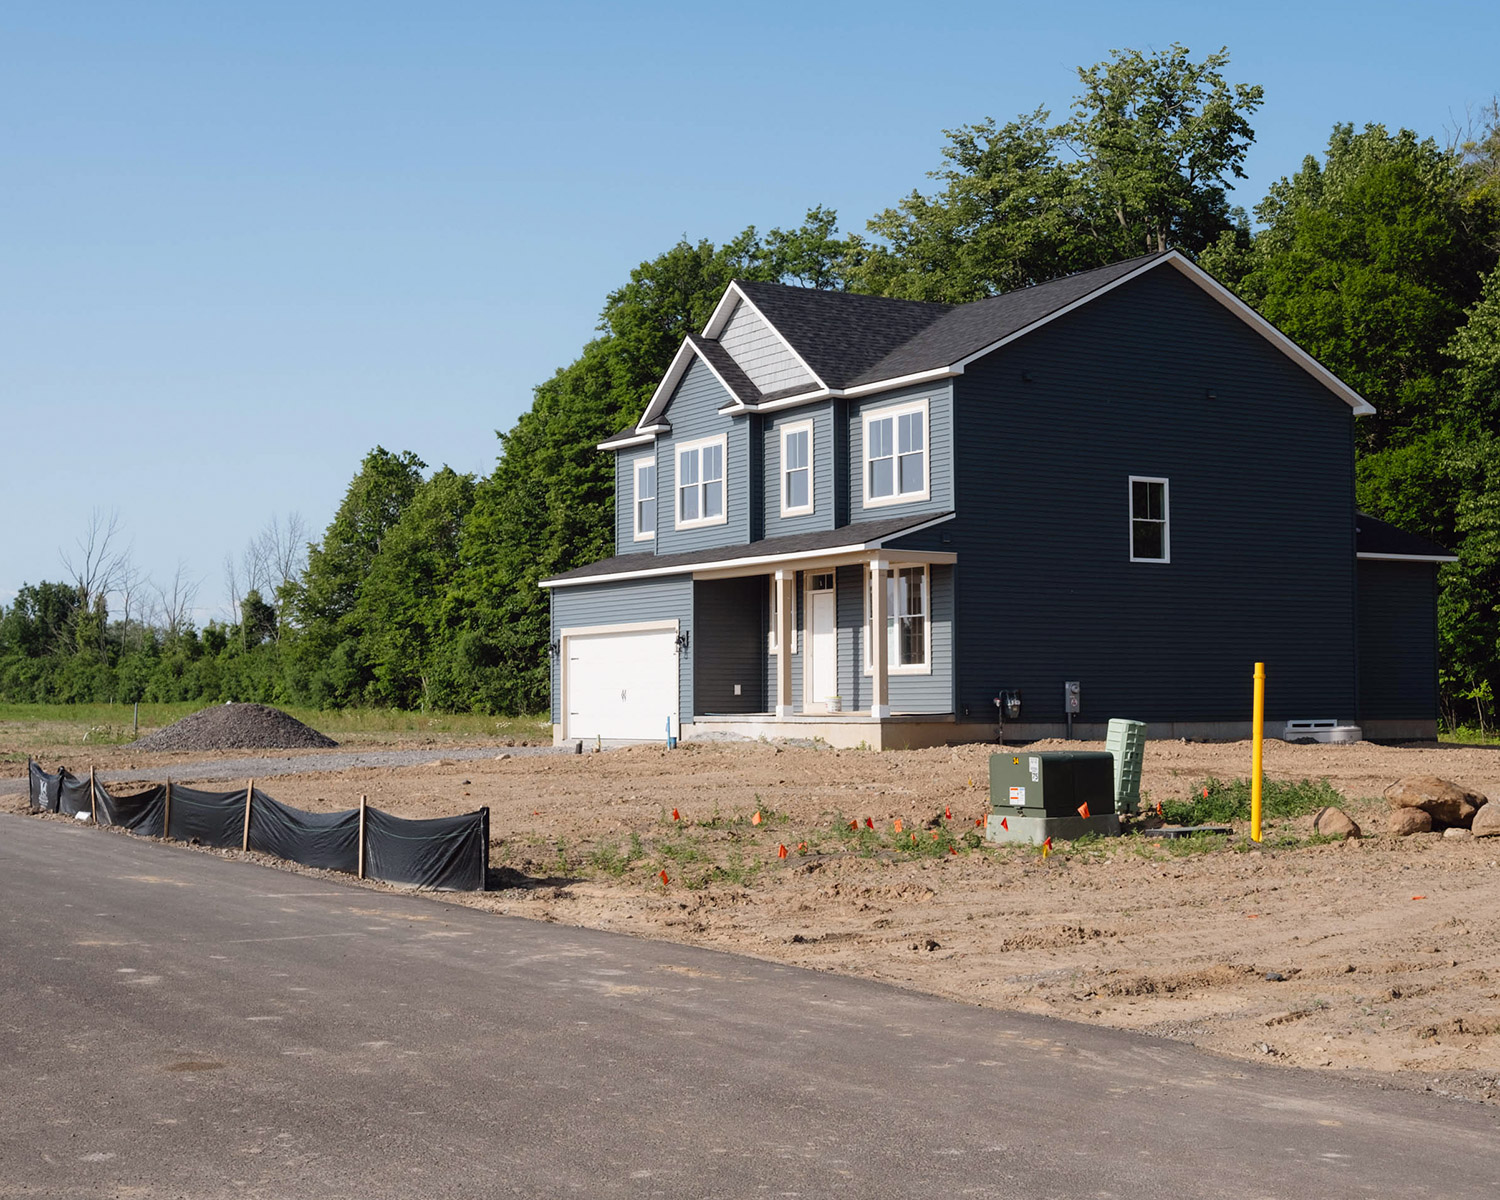 A completed new home is shown in an empty new housing development